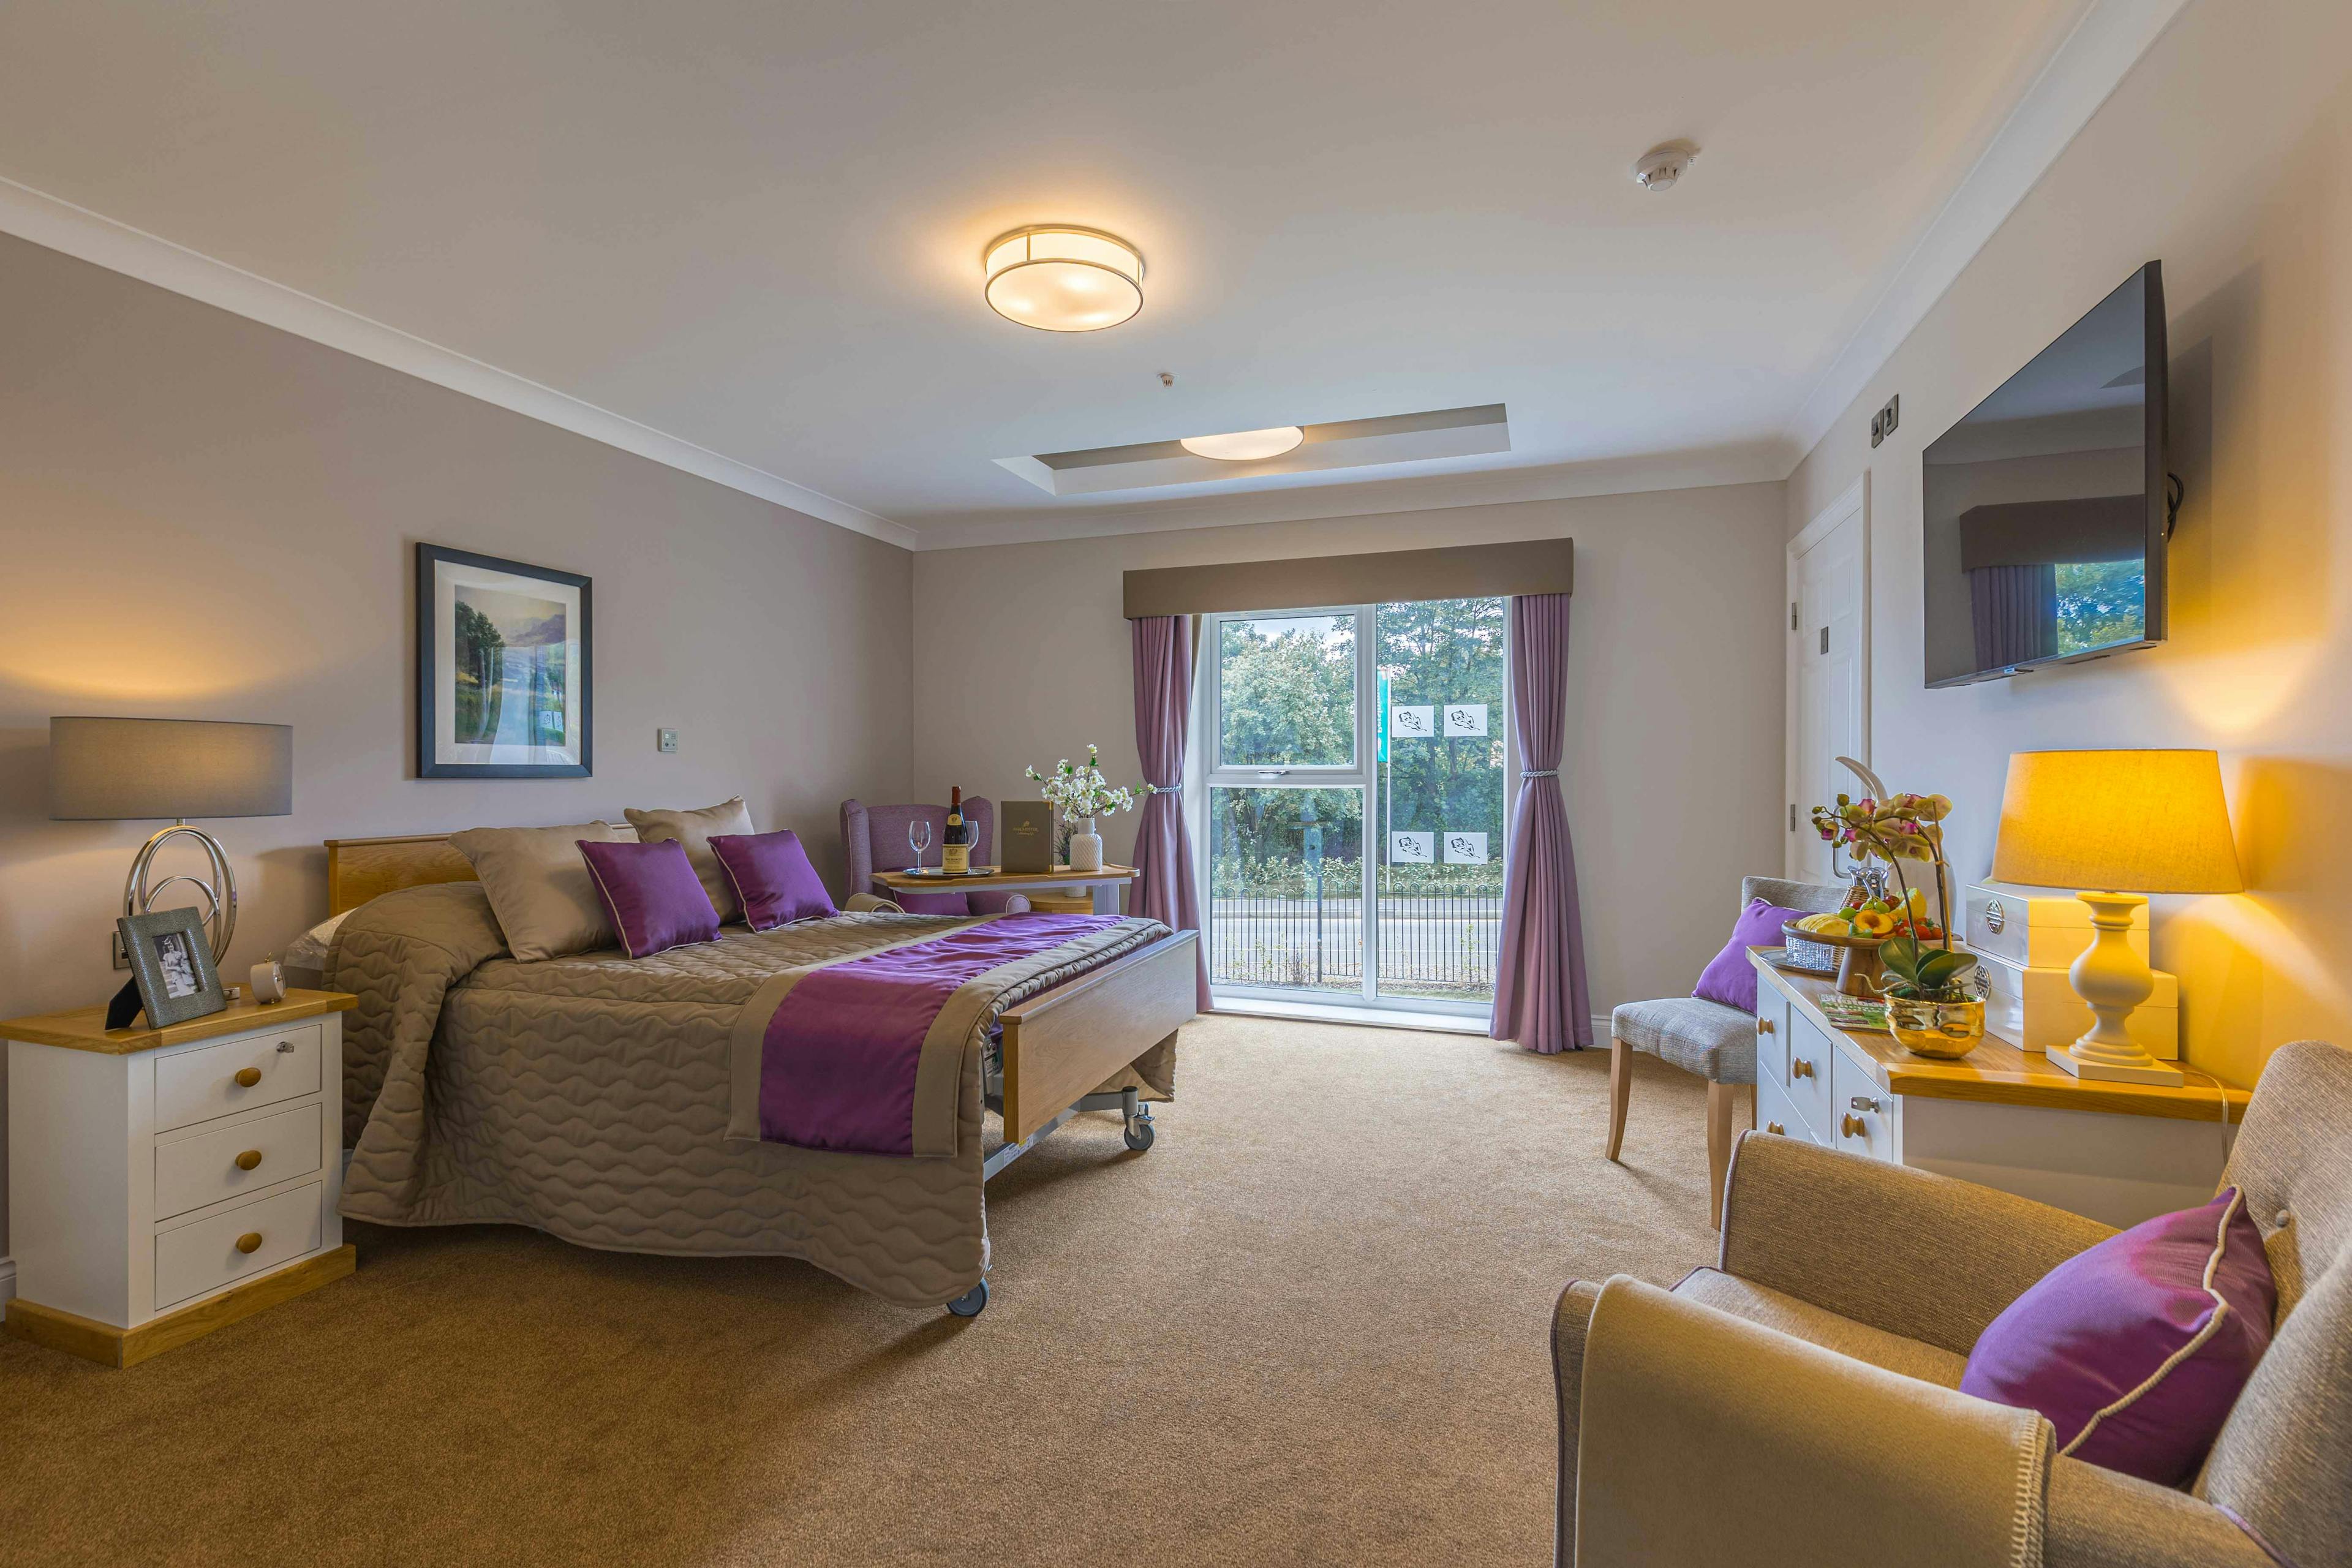 Bedroom at Elgar Court Care Home in Malvern, Worcestershire